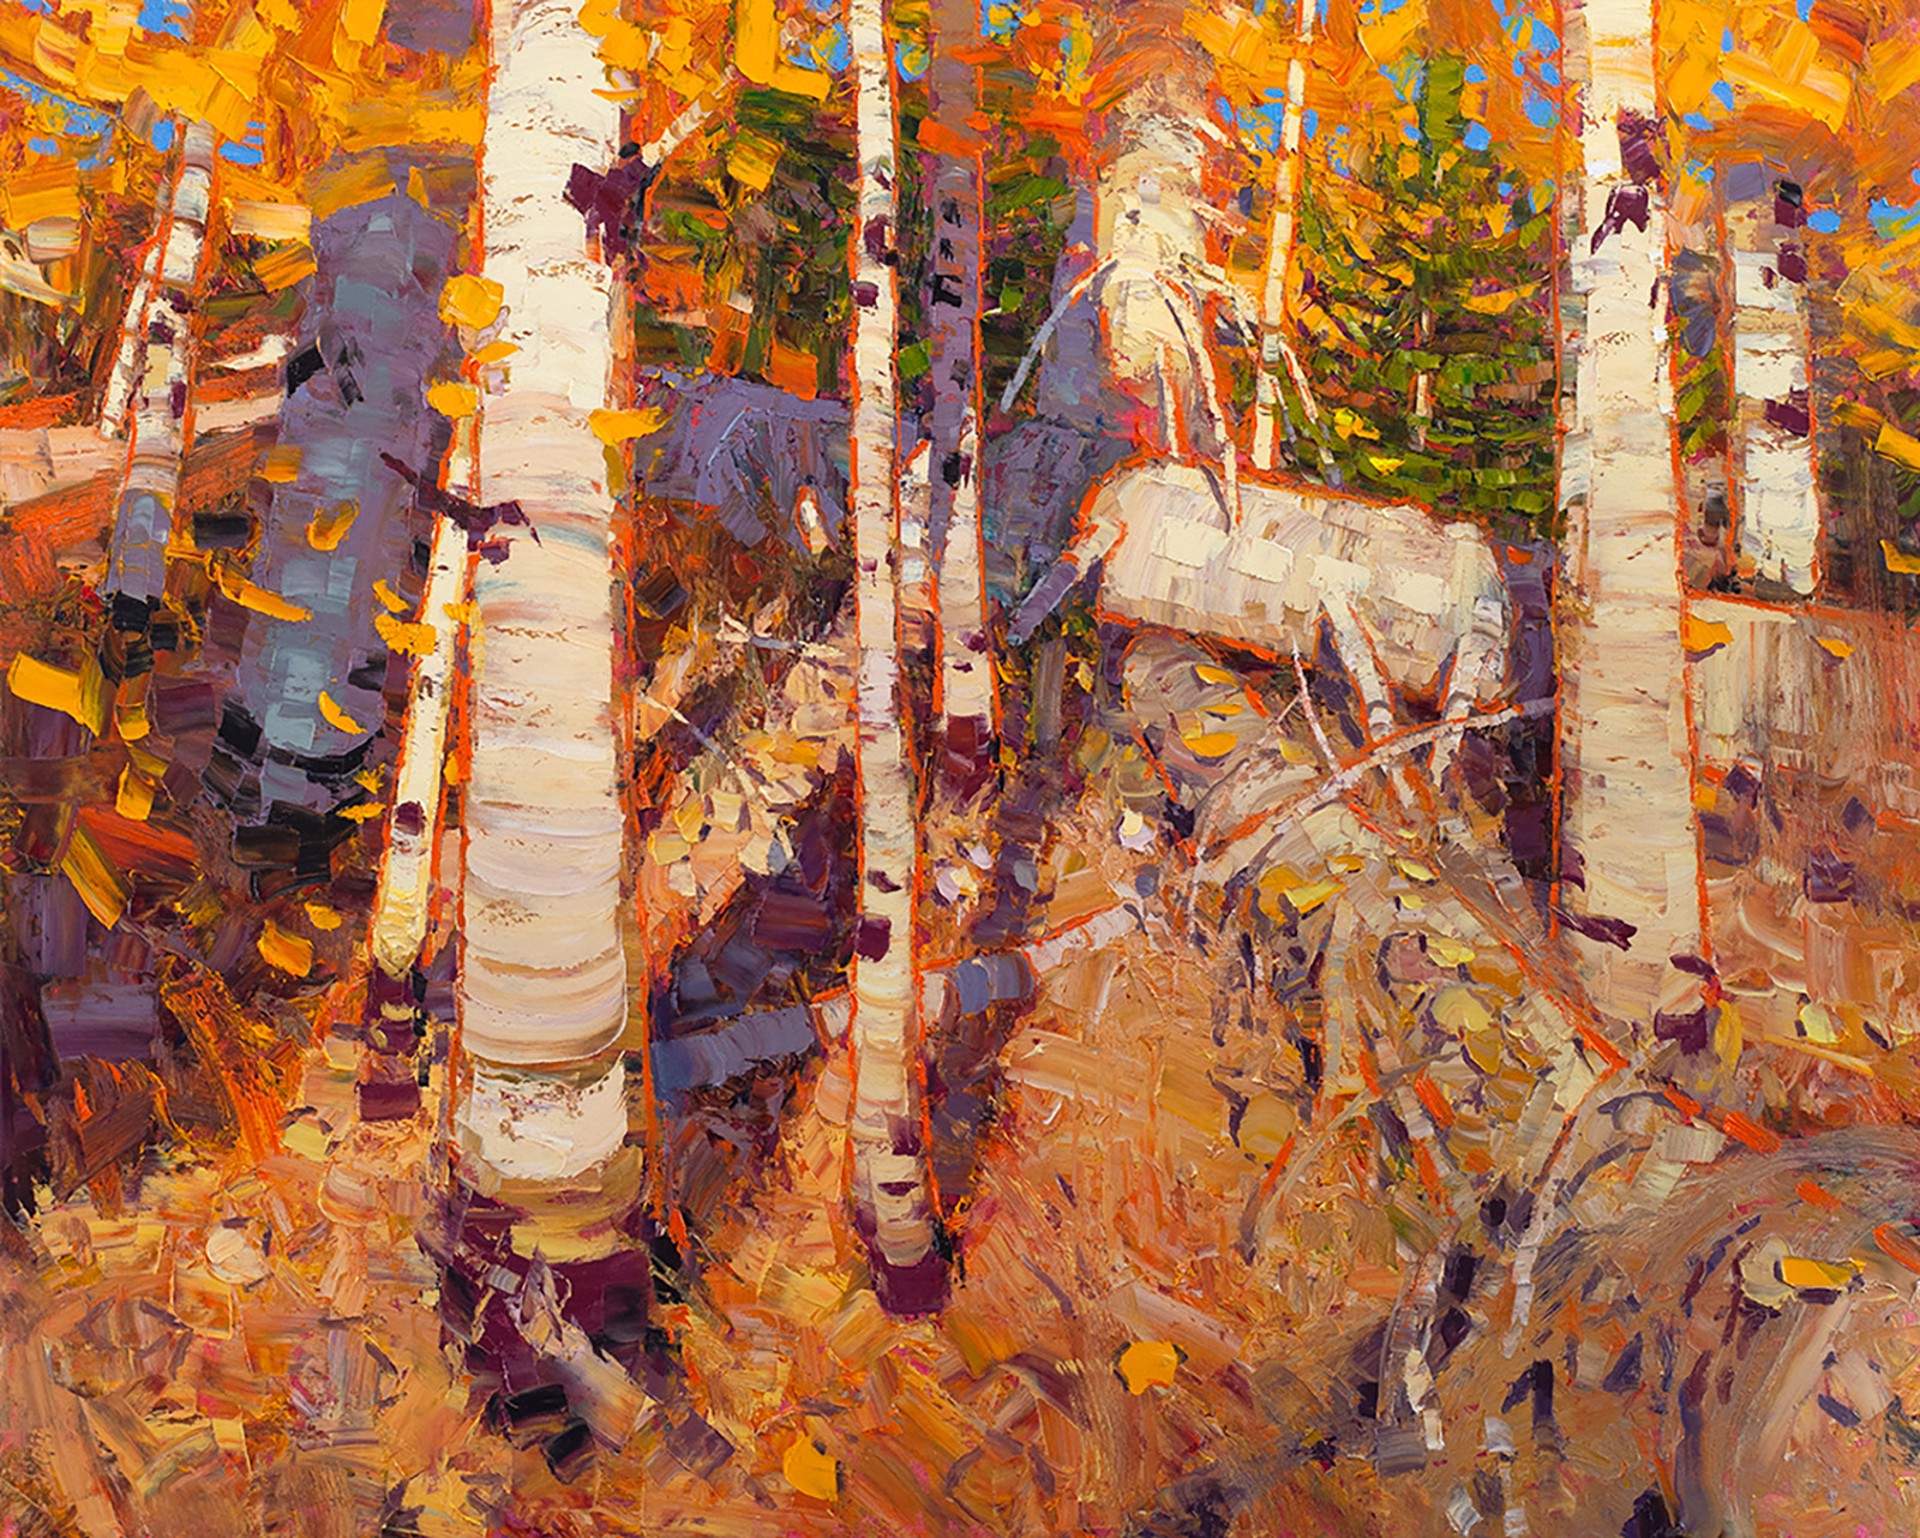 Original Oil Painting By Silas Thompson Of Aspens In The Fall